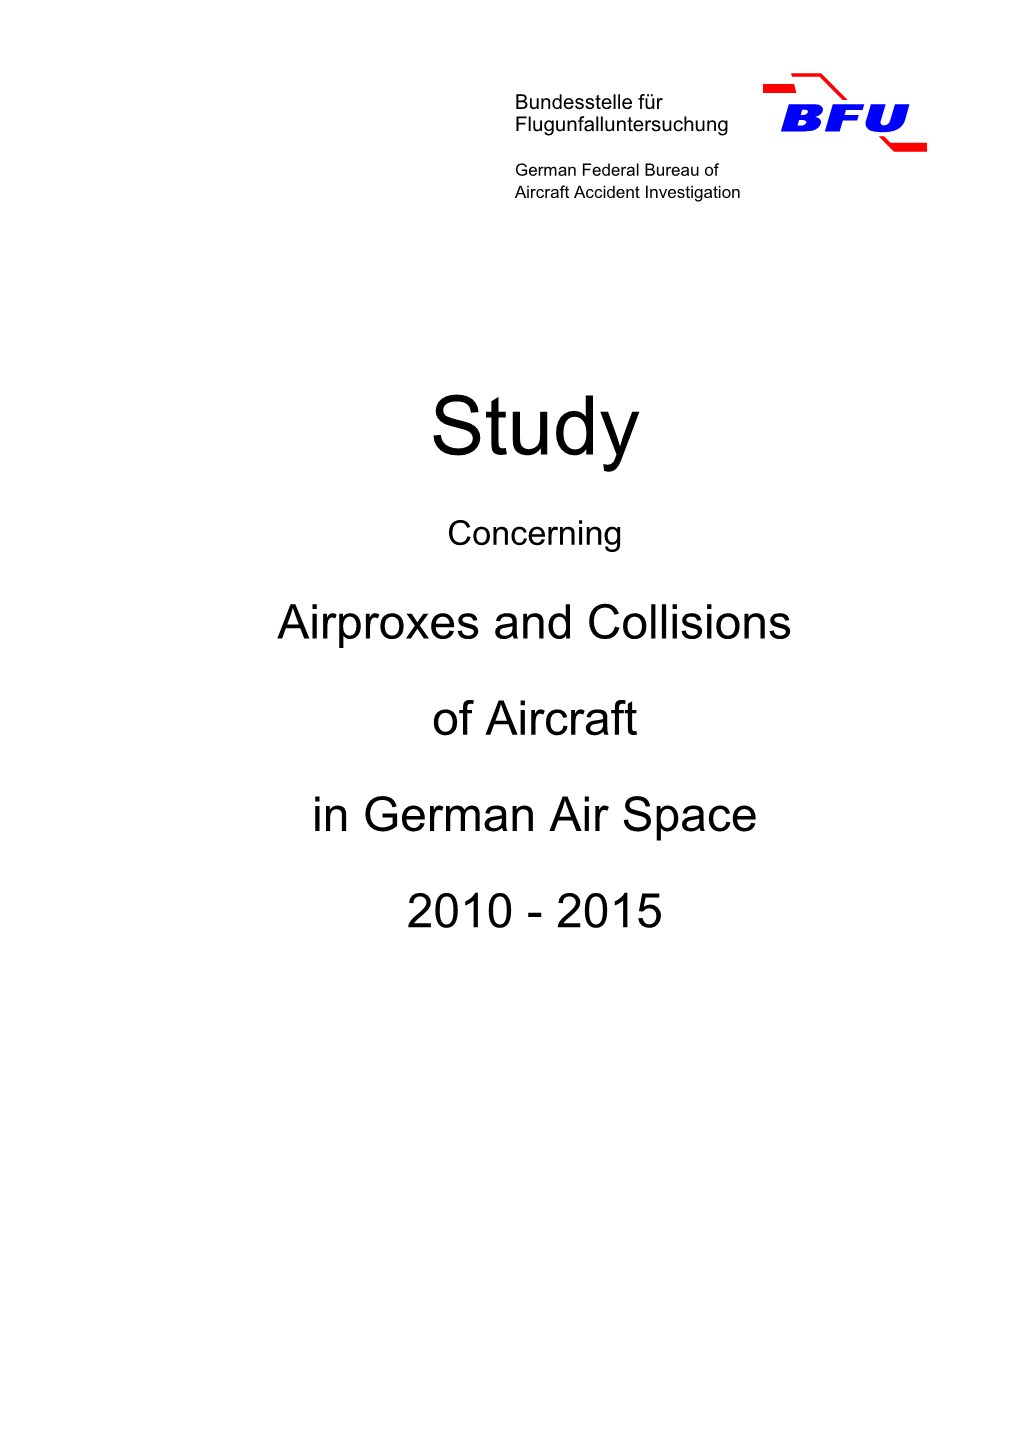 Study Concerning Airproxes and Collisions of Aircraft in German Air